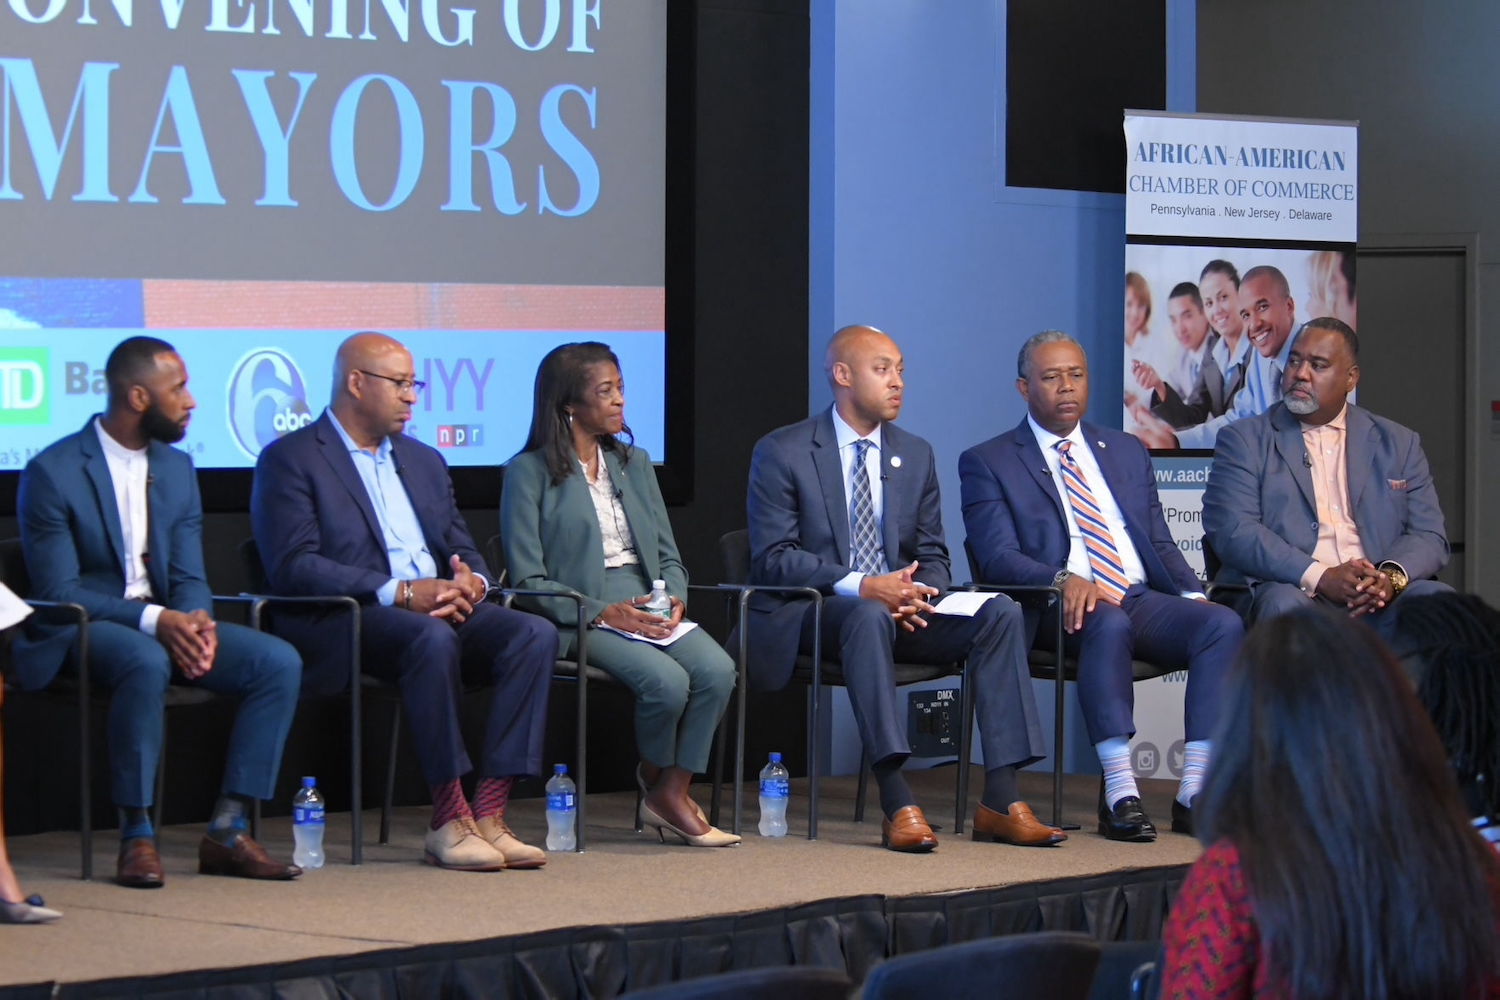 African American Chamber hosts annual Black mayors roundtable The